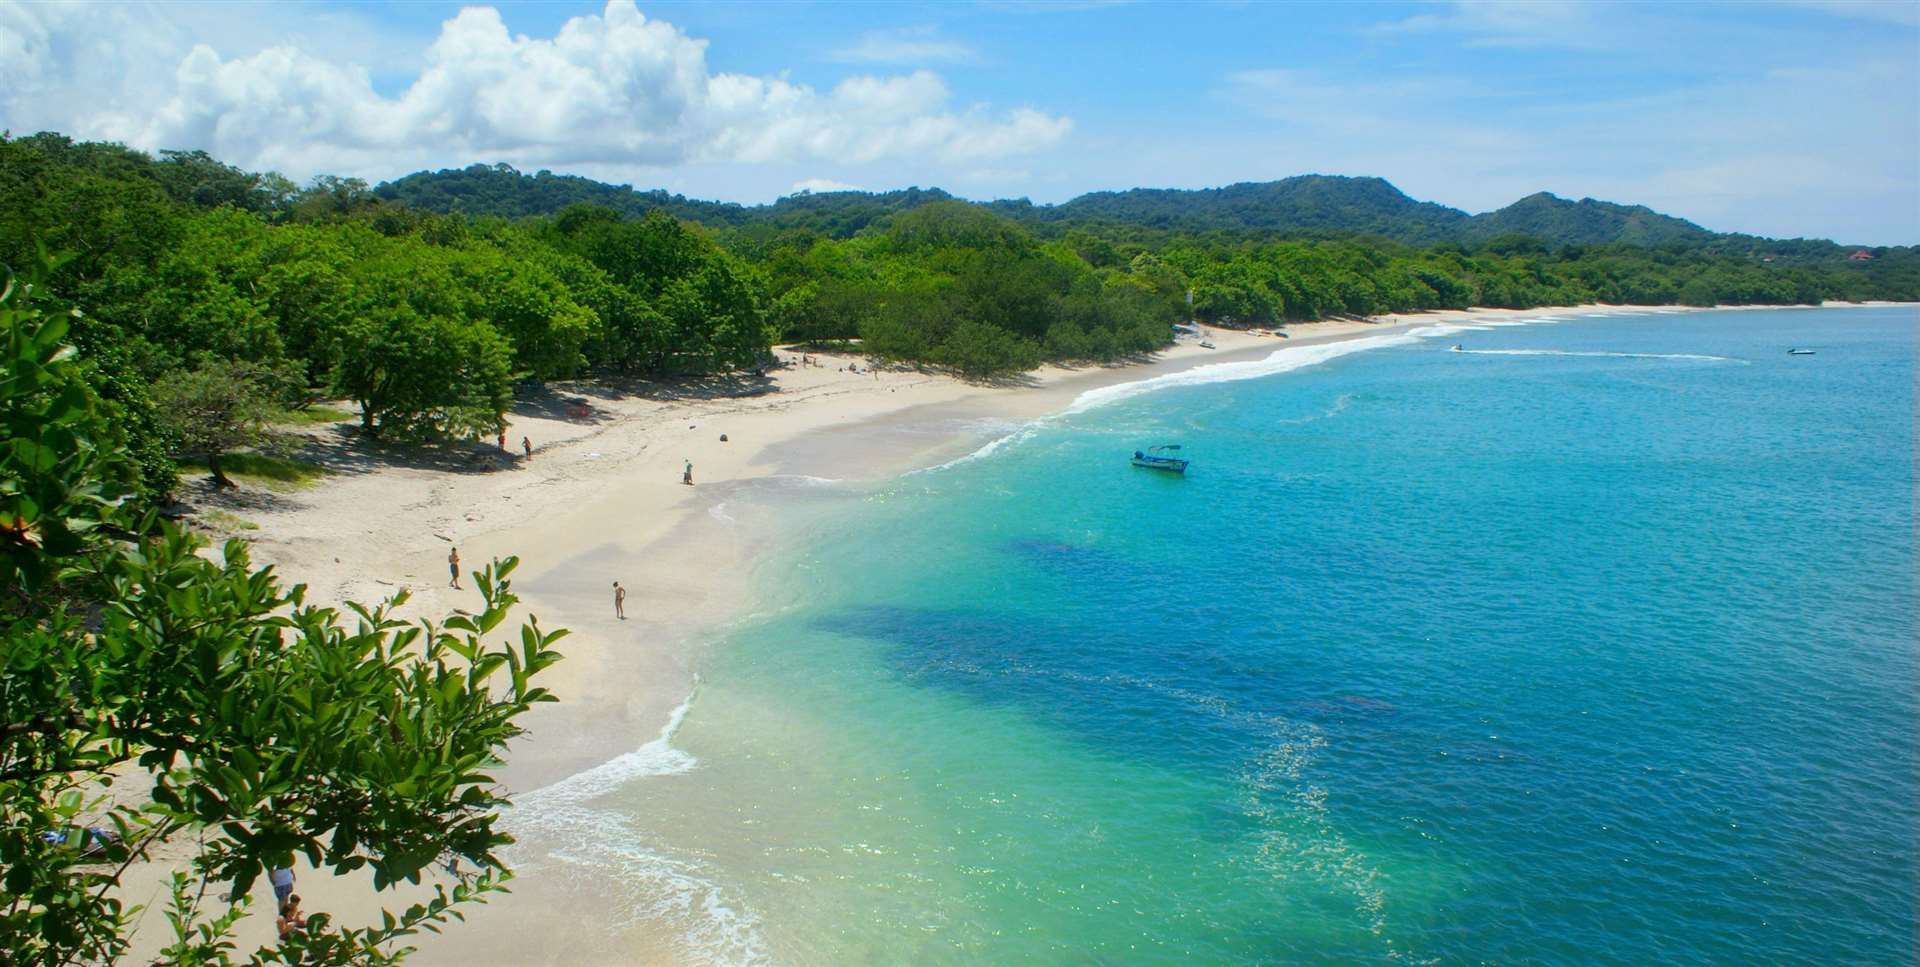 Conchal beach is one of the most beautiful beaches in Central America and the hottest destination spot in Costa Rica.